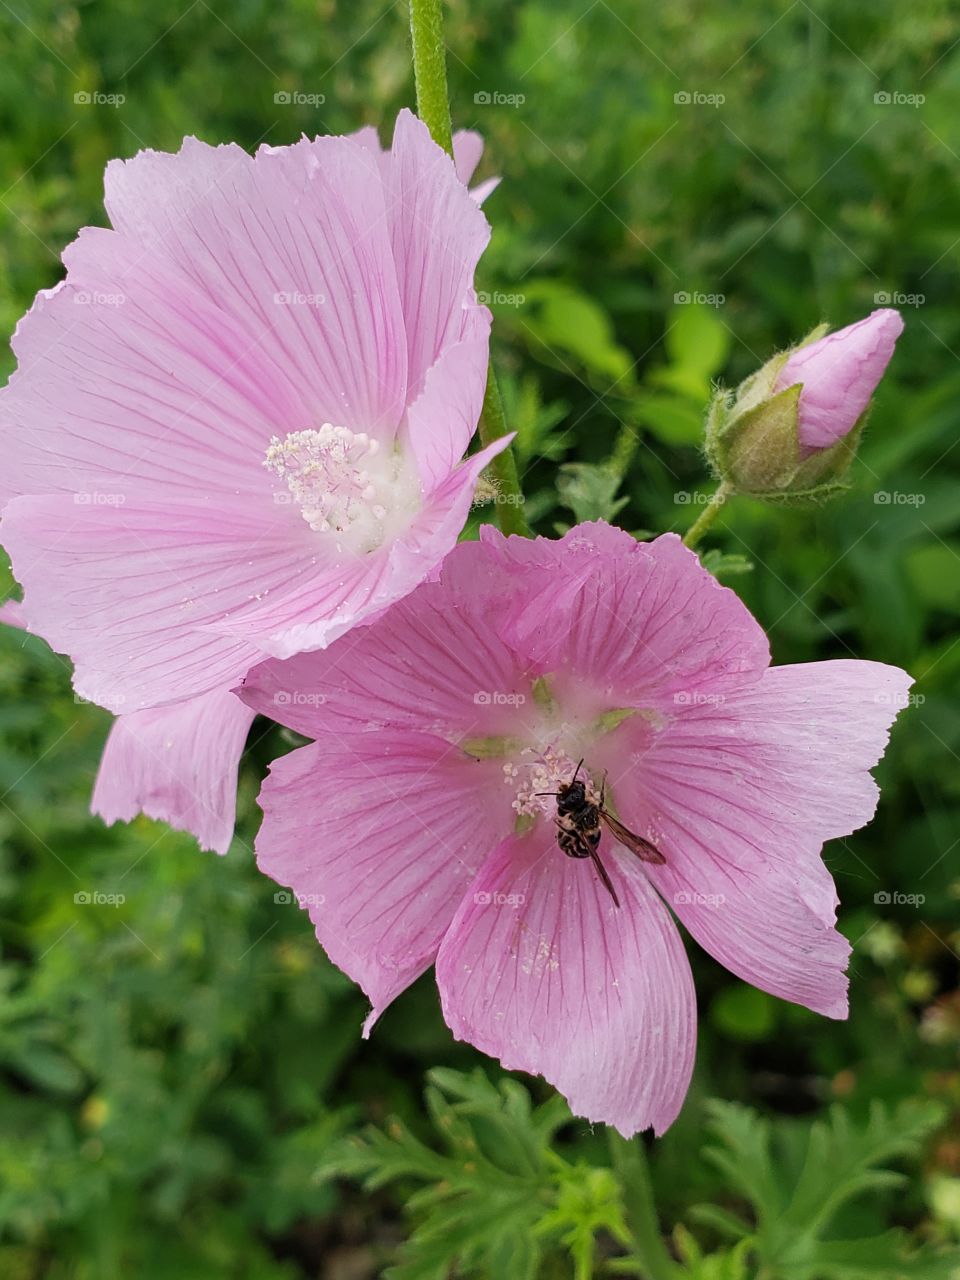 bustling bee on a flower